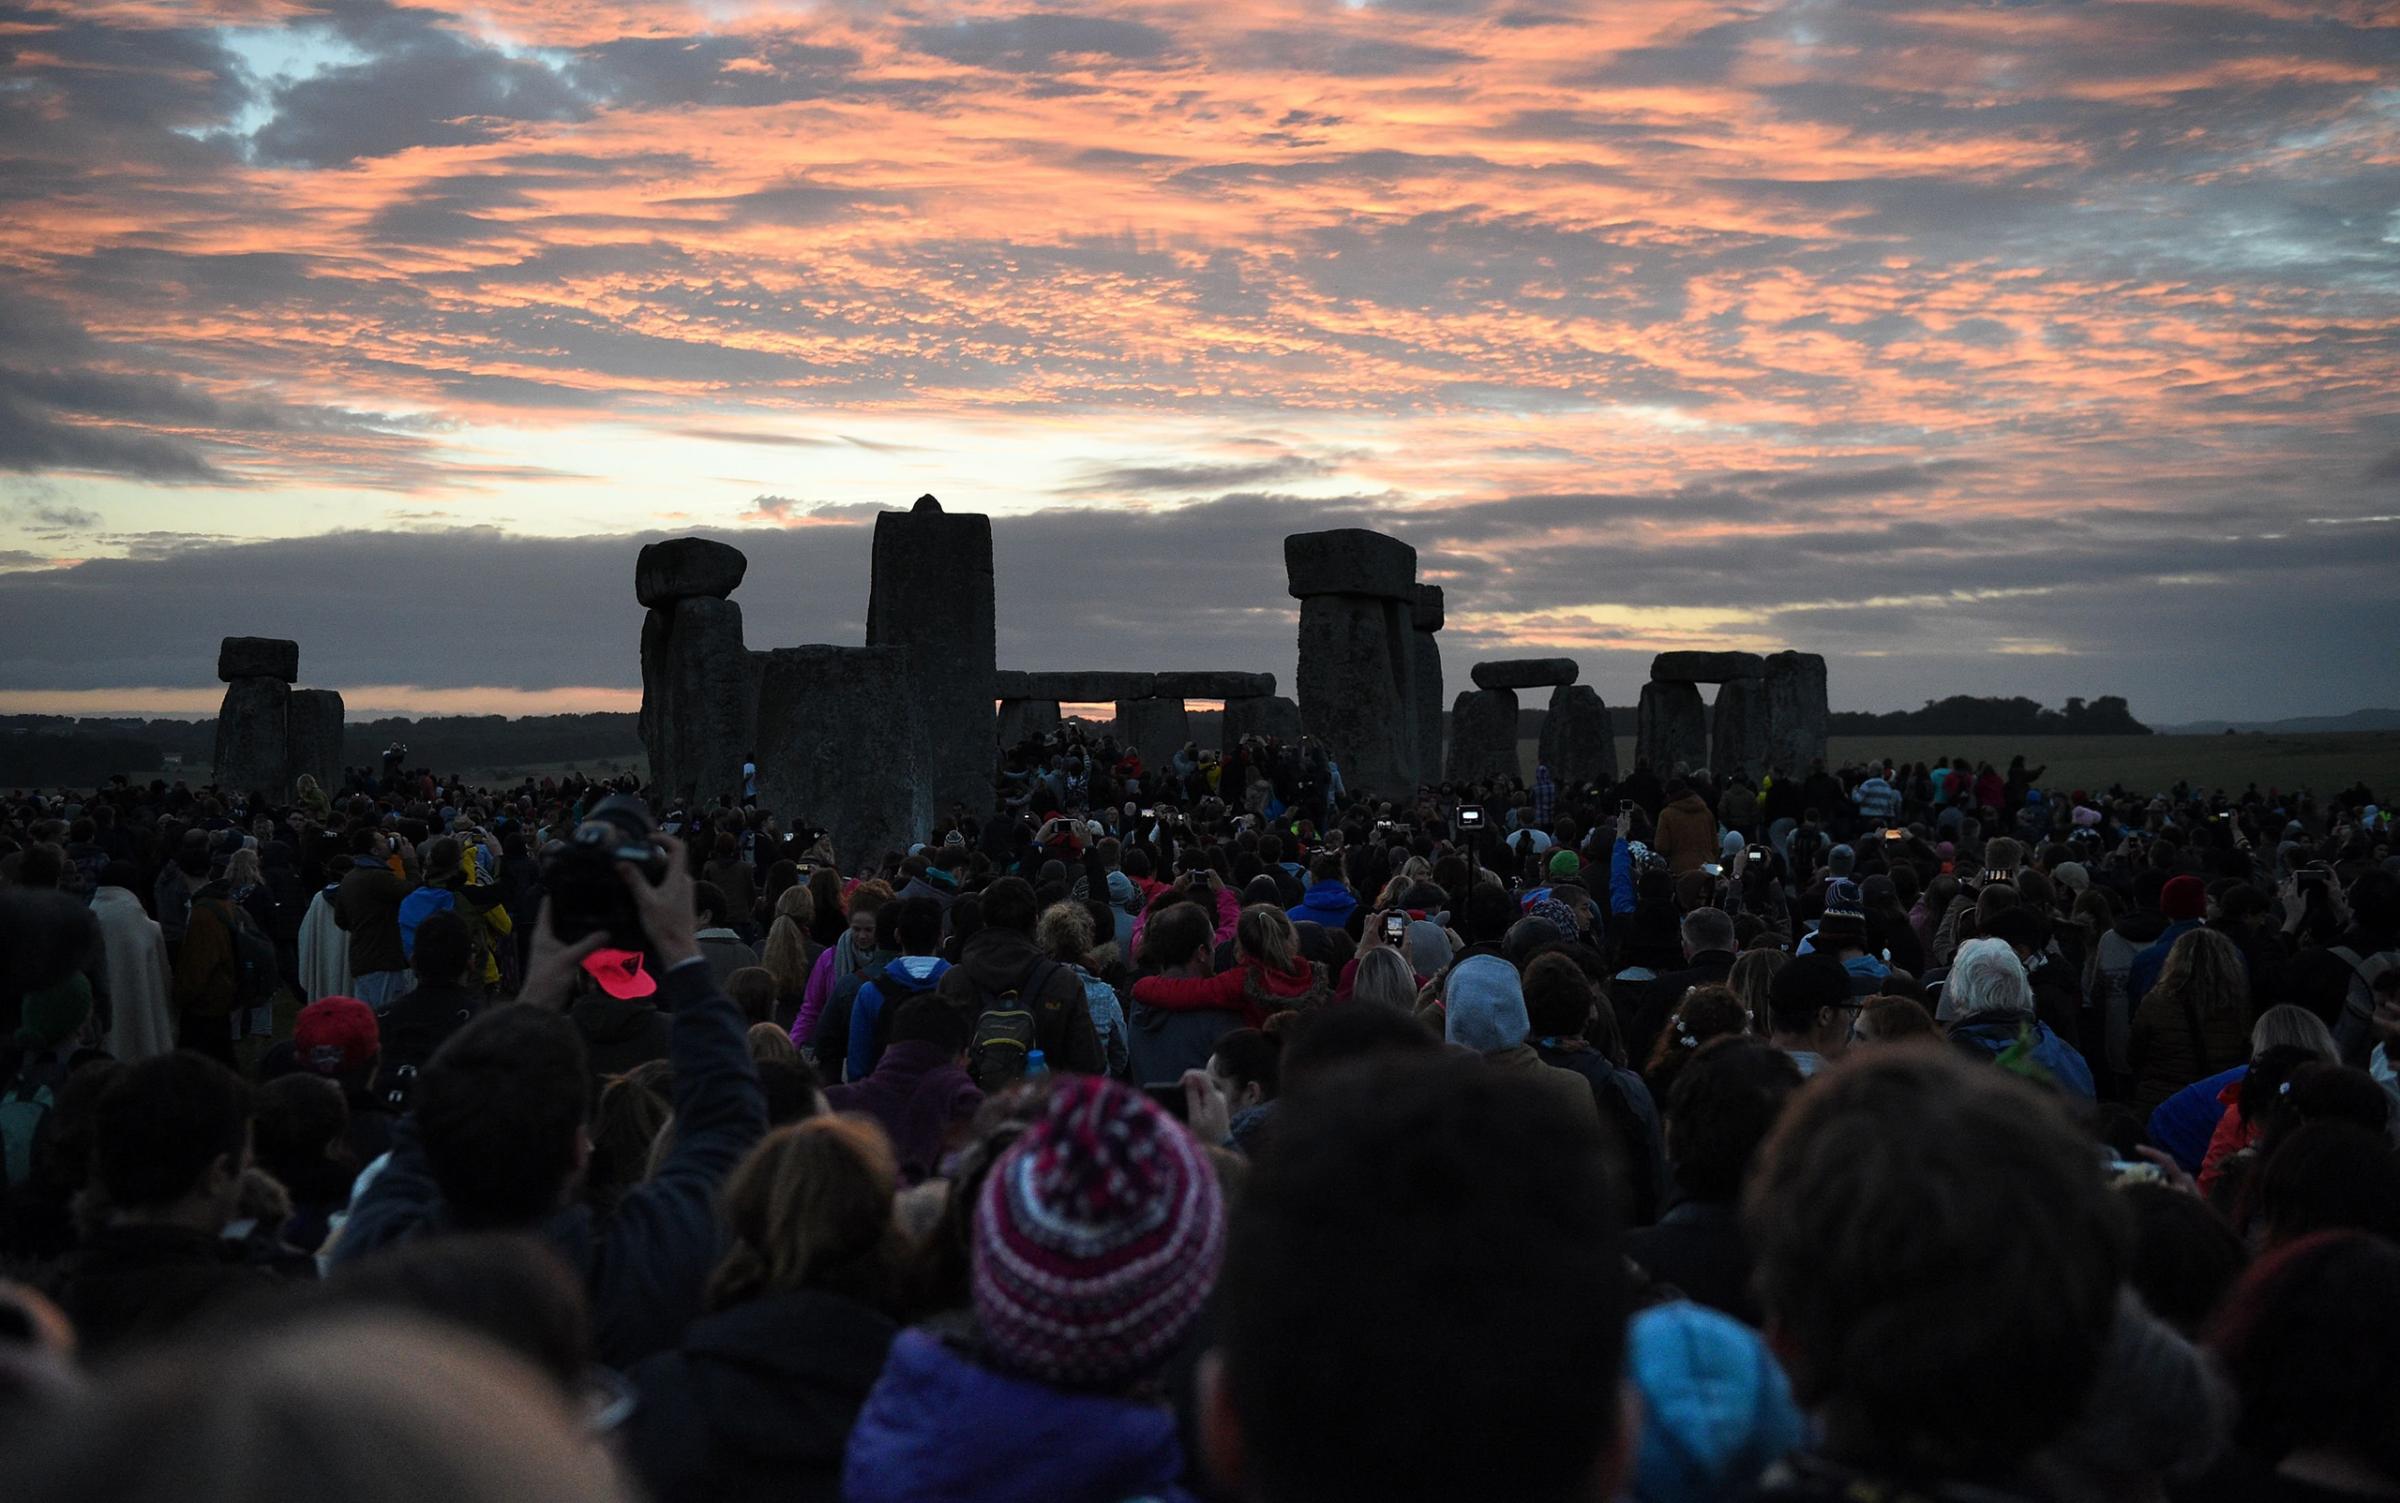 People gather at Stonehenge in Wiltshire to see in the new dawn during this year's Summer Solstice, June 21, 2016.